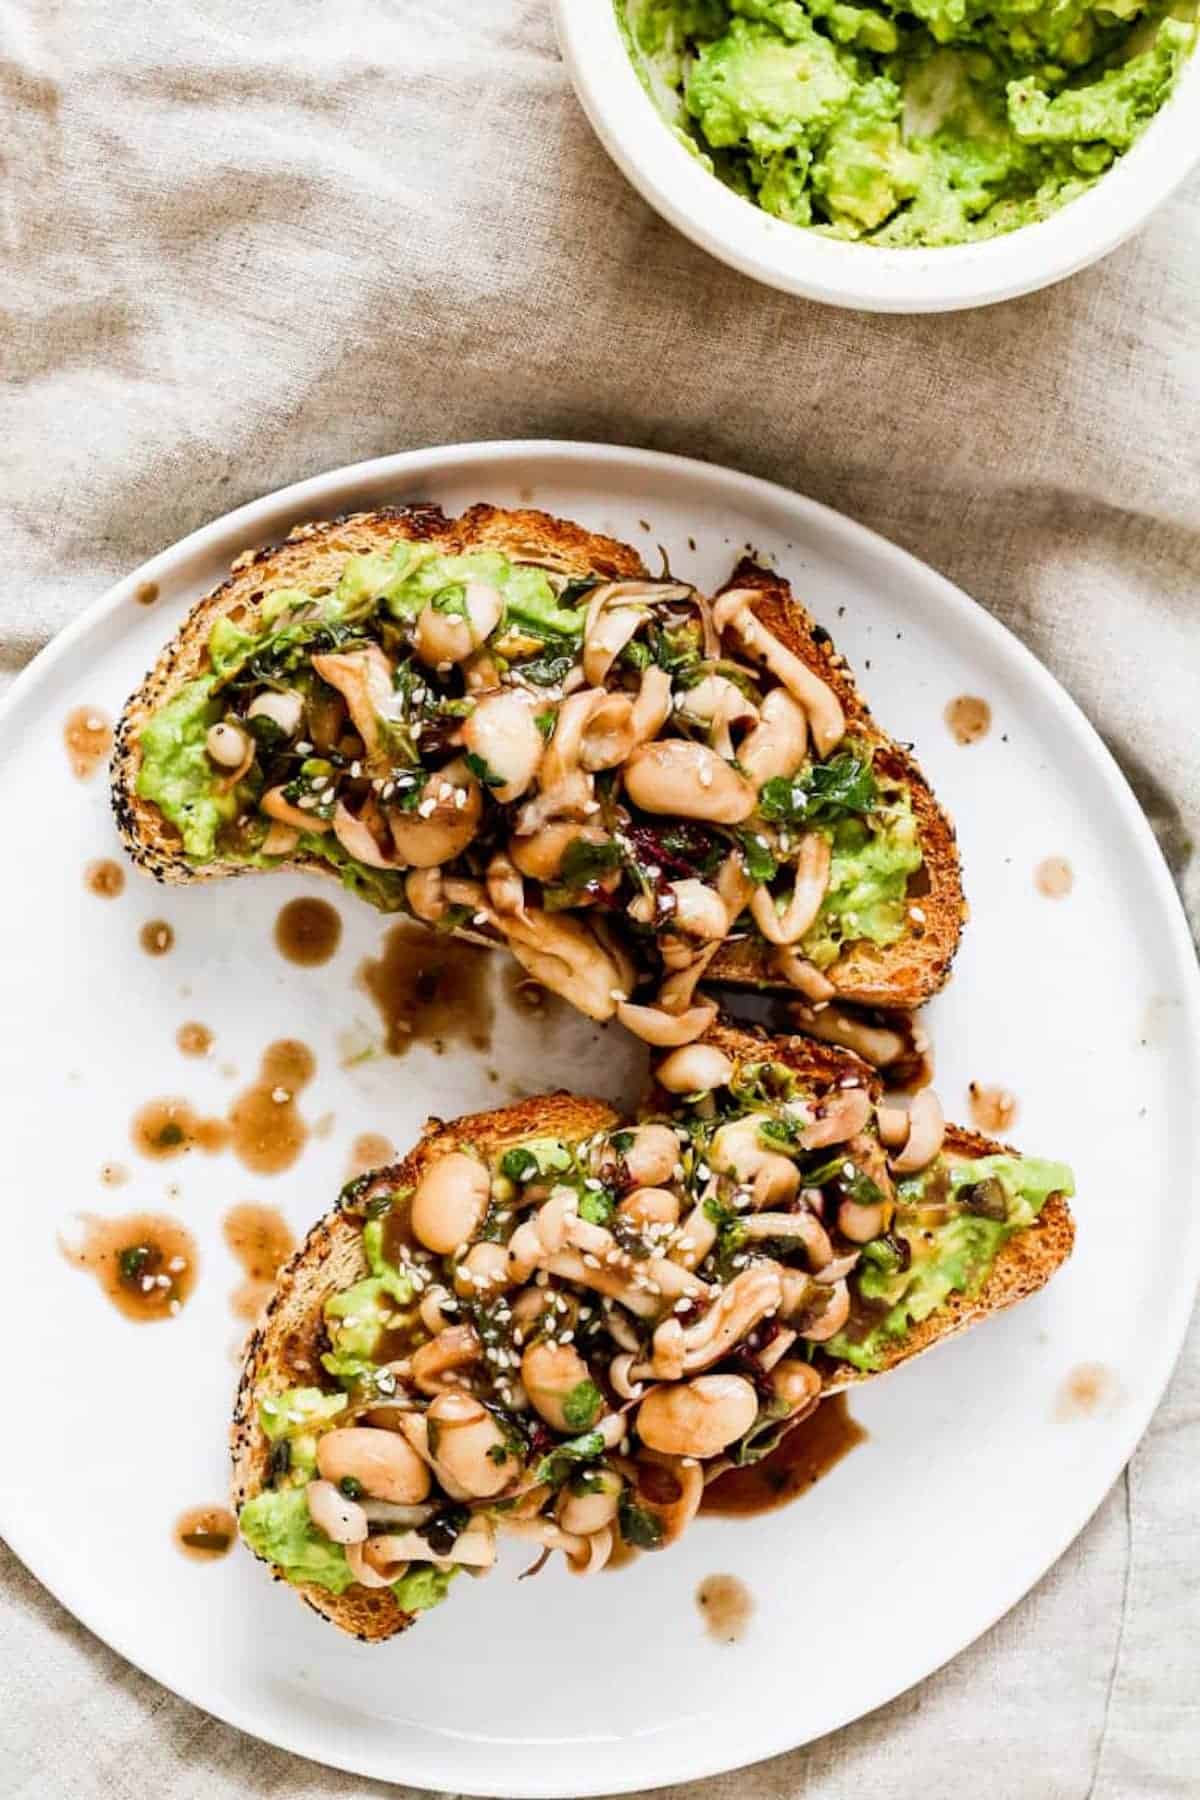 Avocado toast with mushrooms and beans.